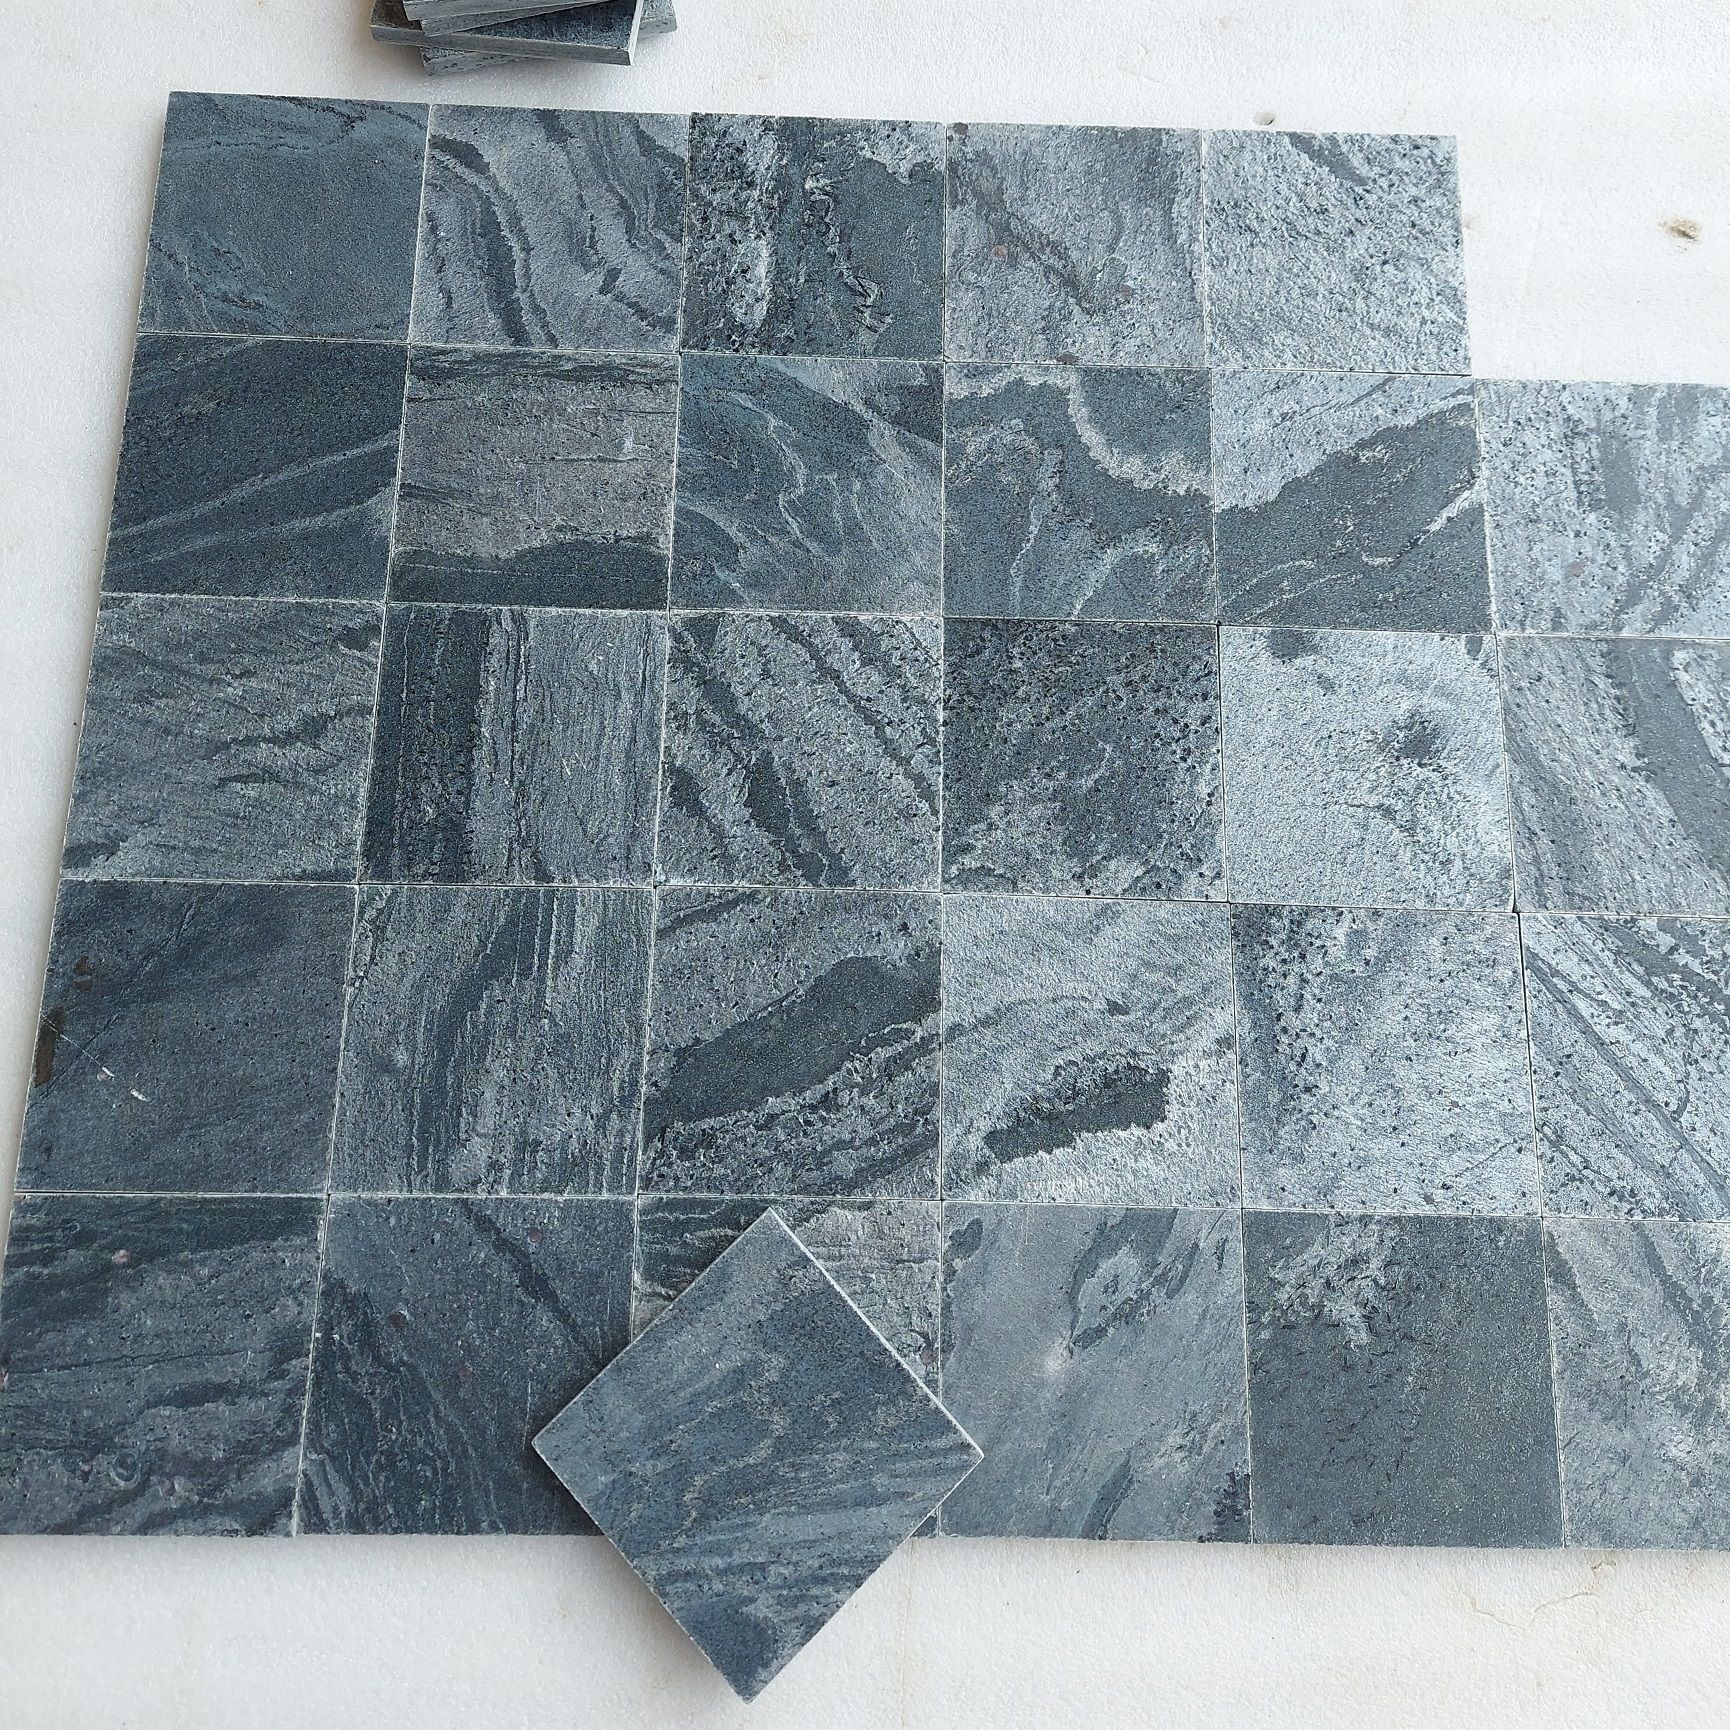 Silver Grey Quartzite Slate 100x100 mm Honed and Brushed Decorative Swimming Pool Floor Tiles Wall Cladding Stone